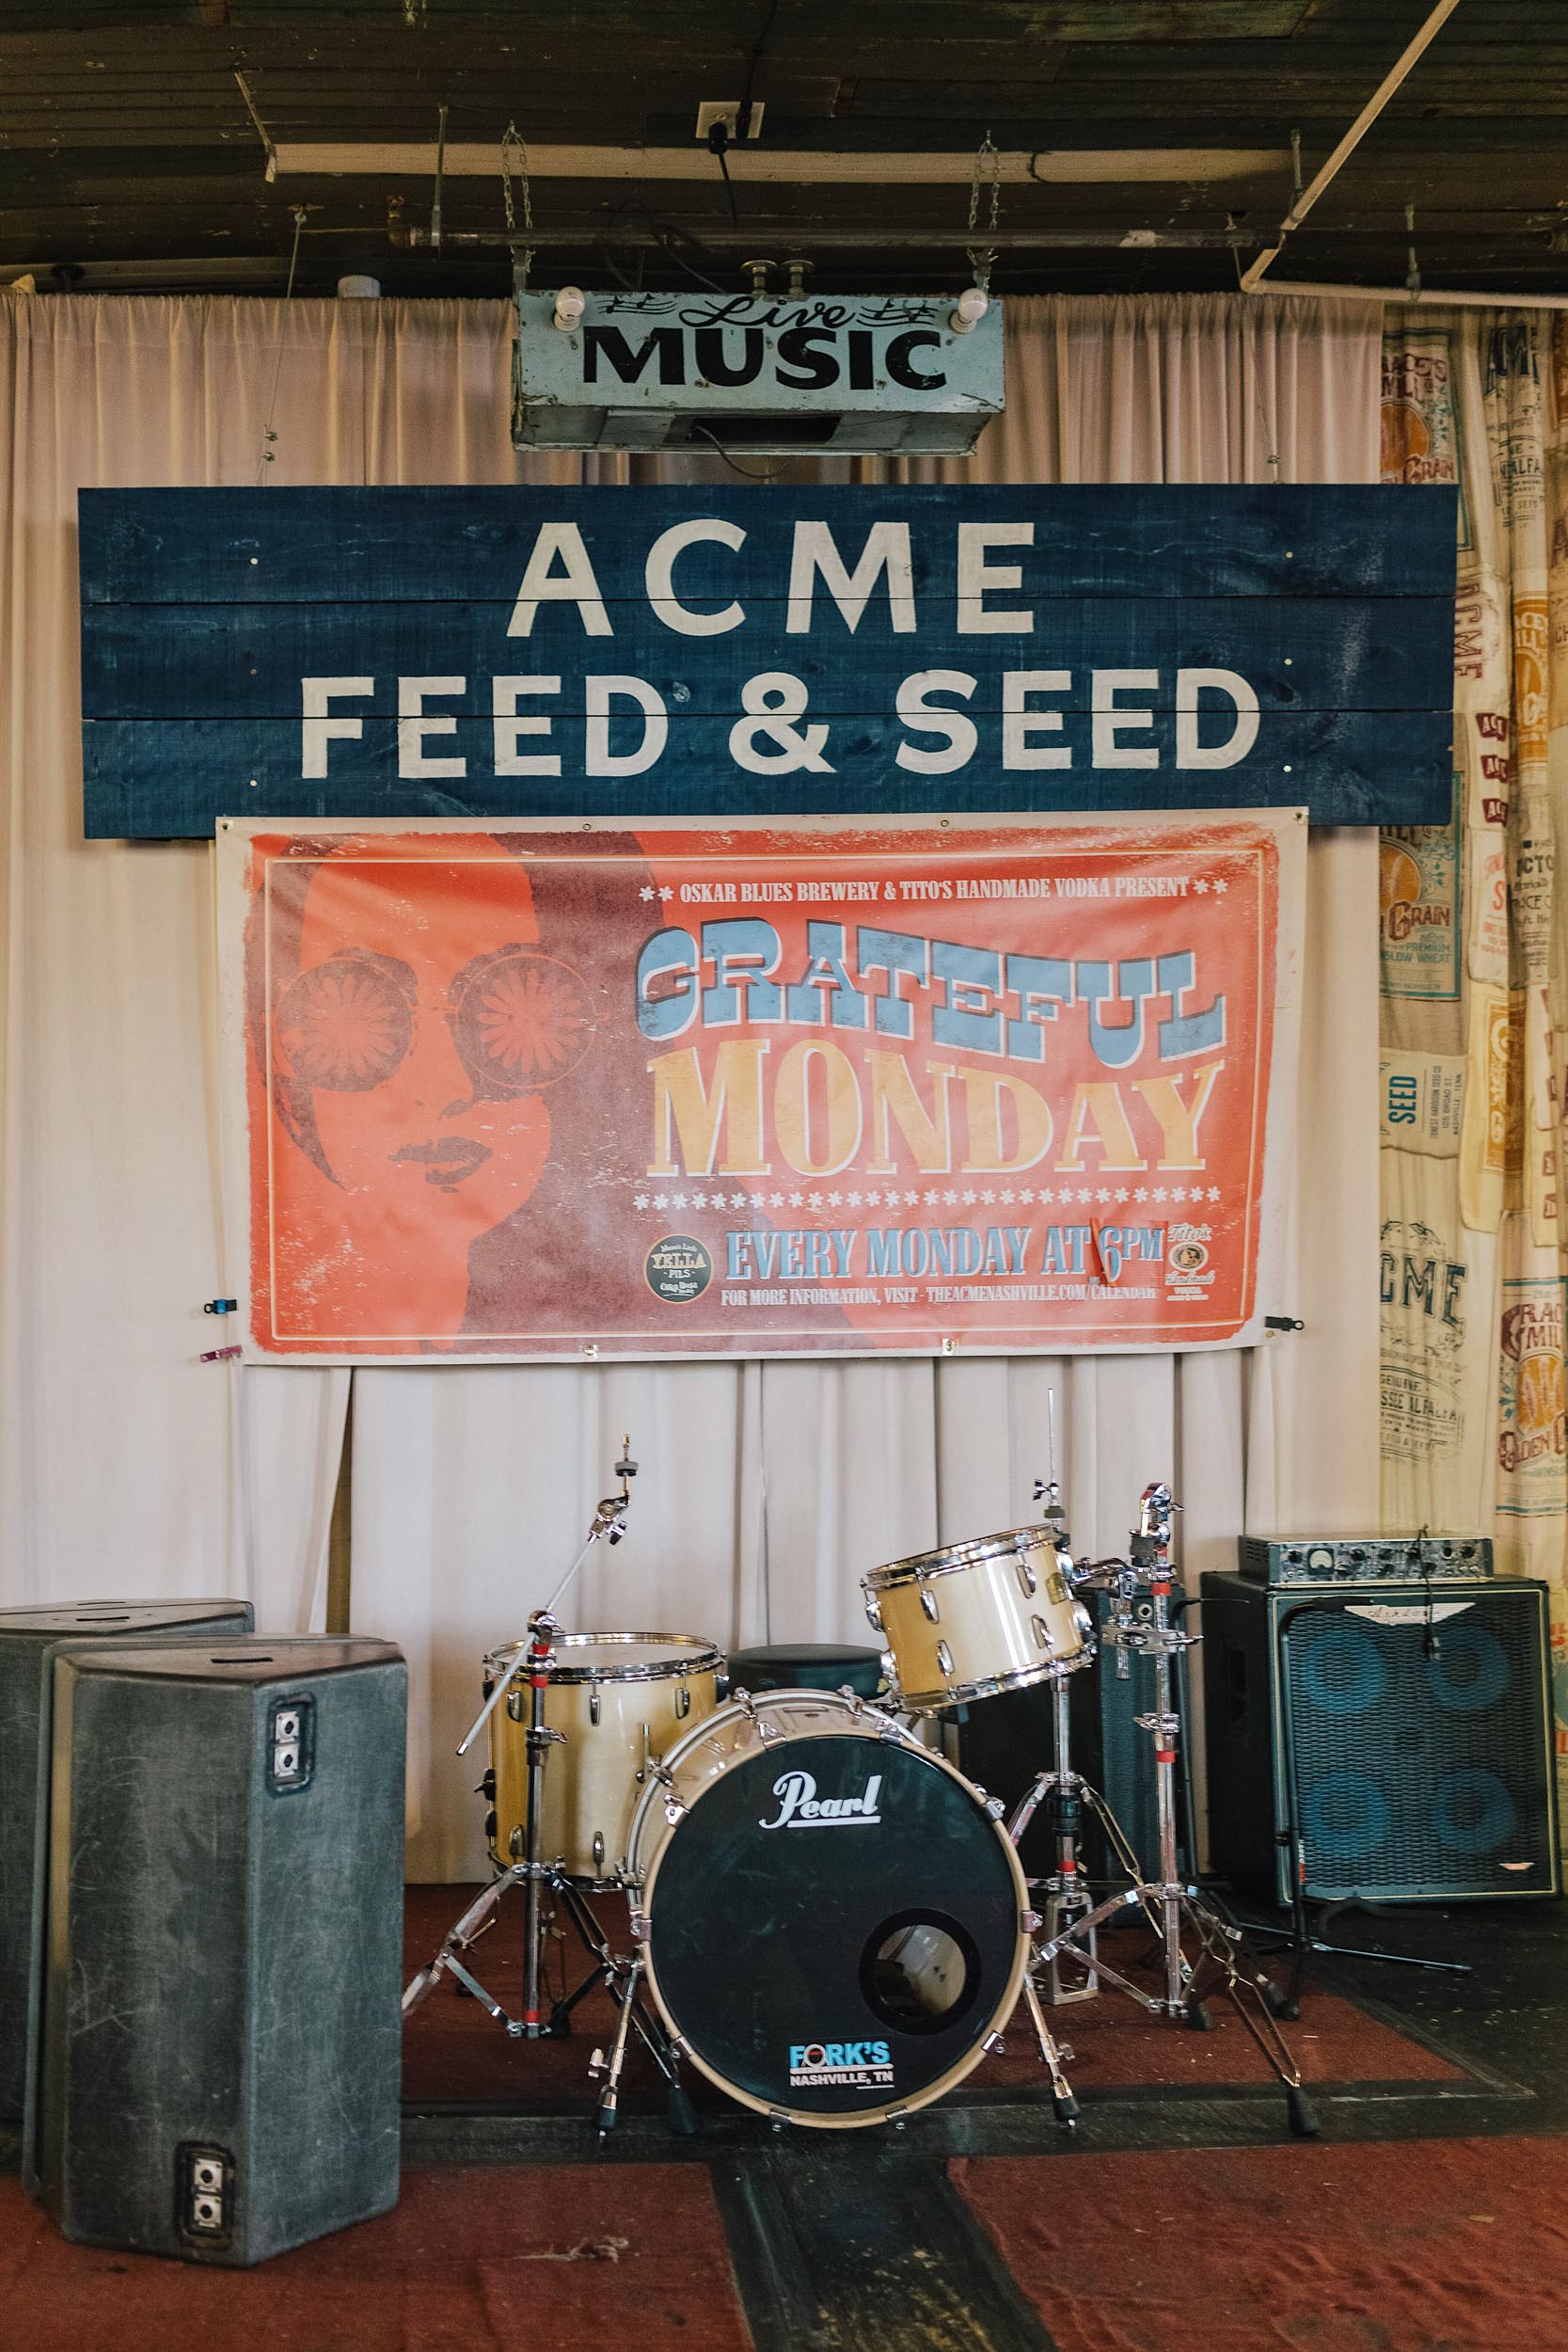 Acme Feed & Seed is a feed store turned restaurant-cocktail-entertainment space on Lower Broadway. Sometimes there is live music, too!